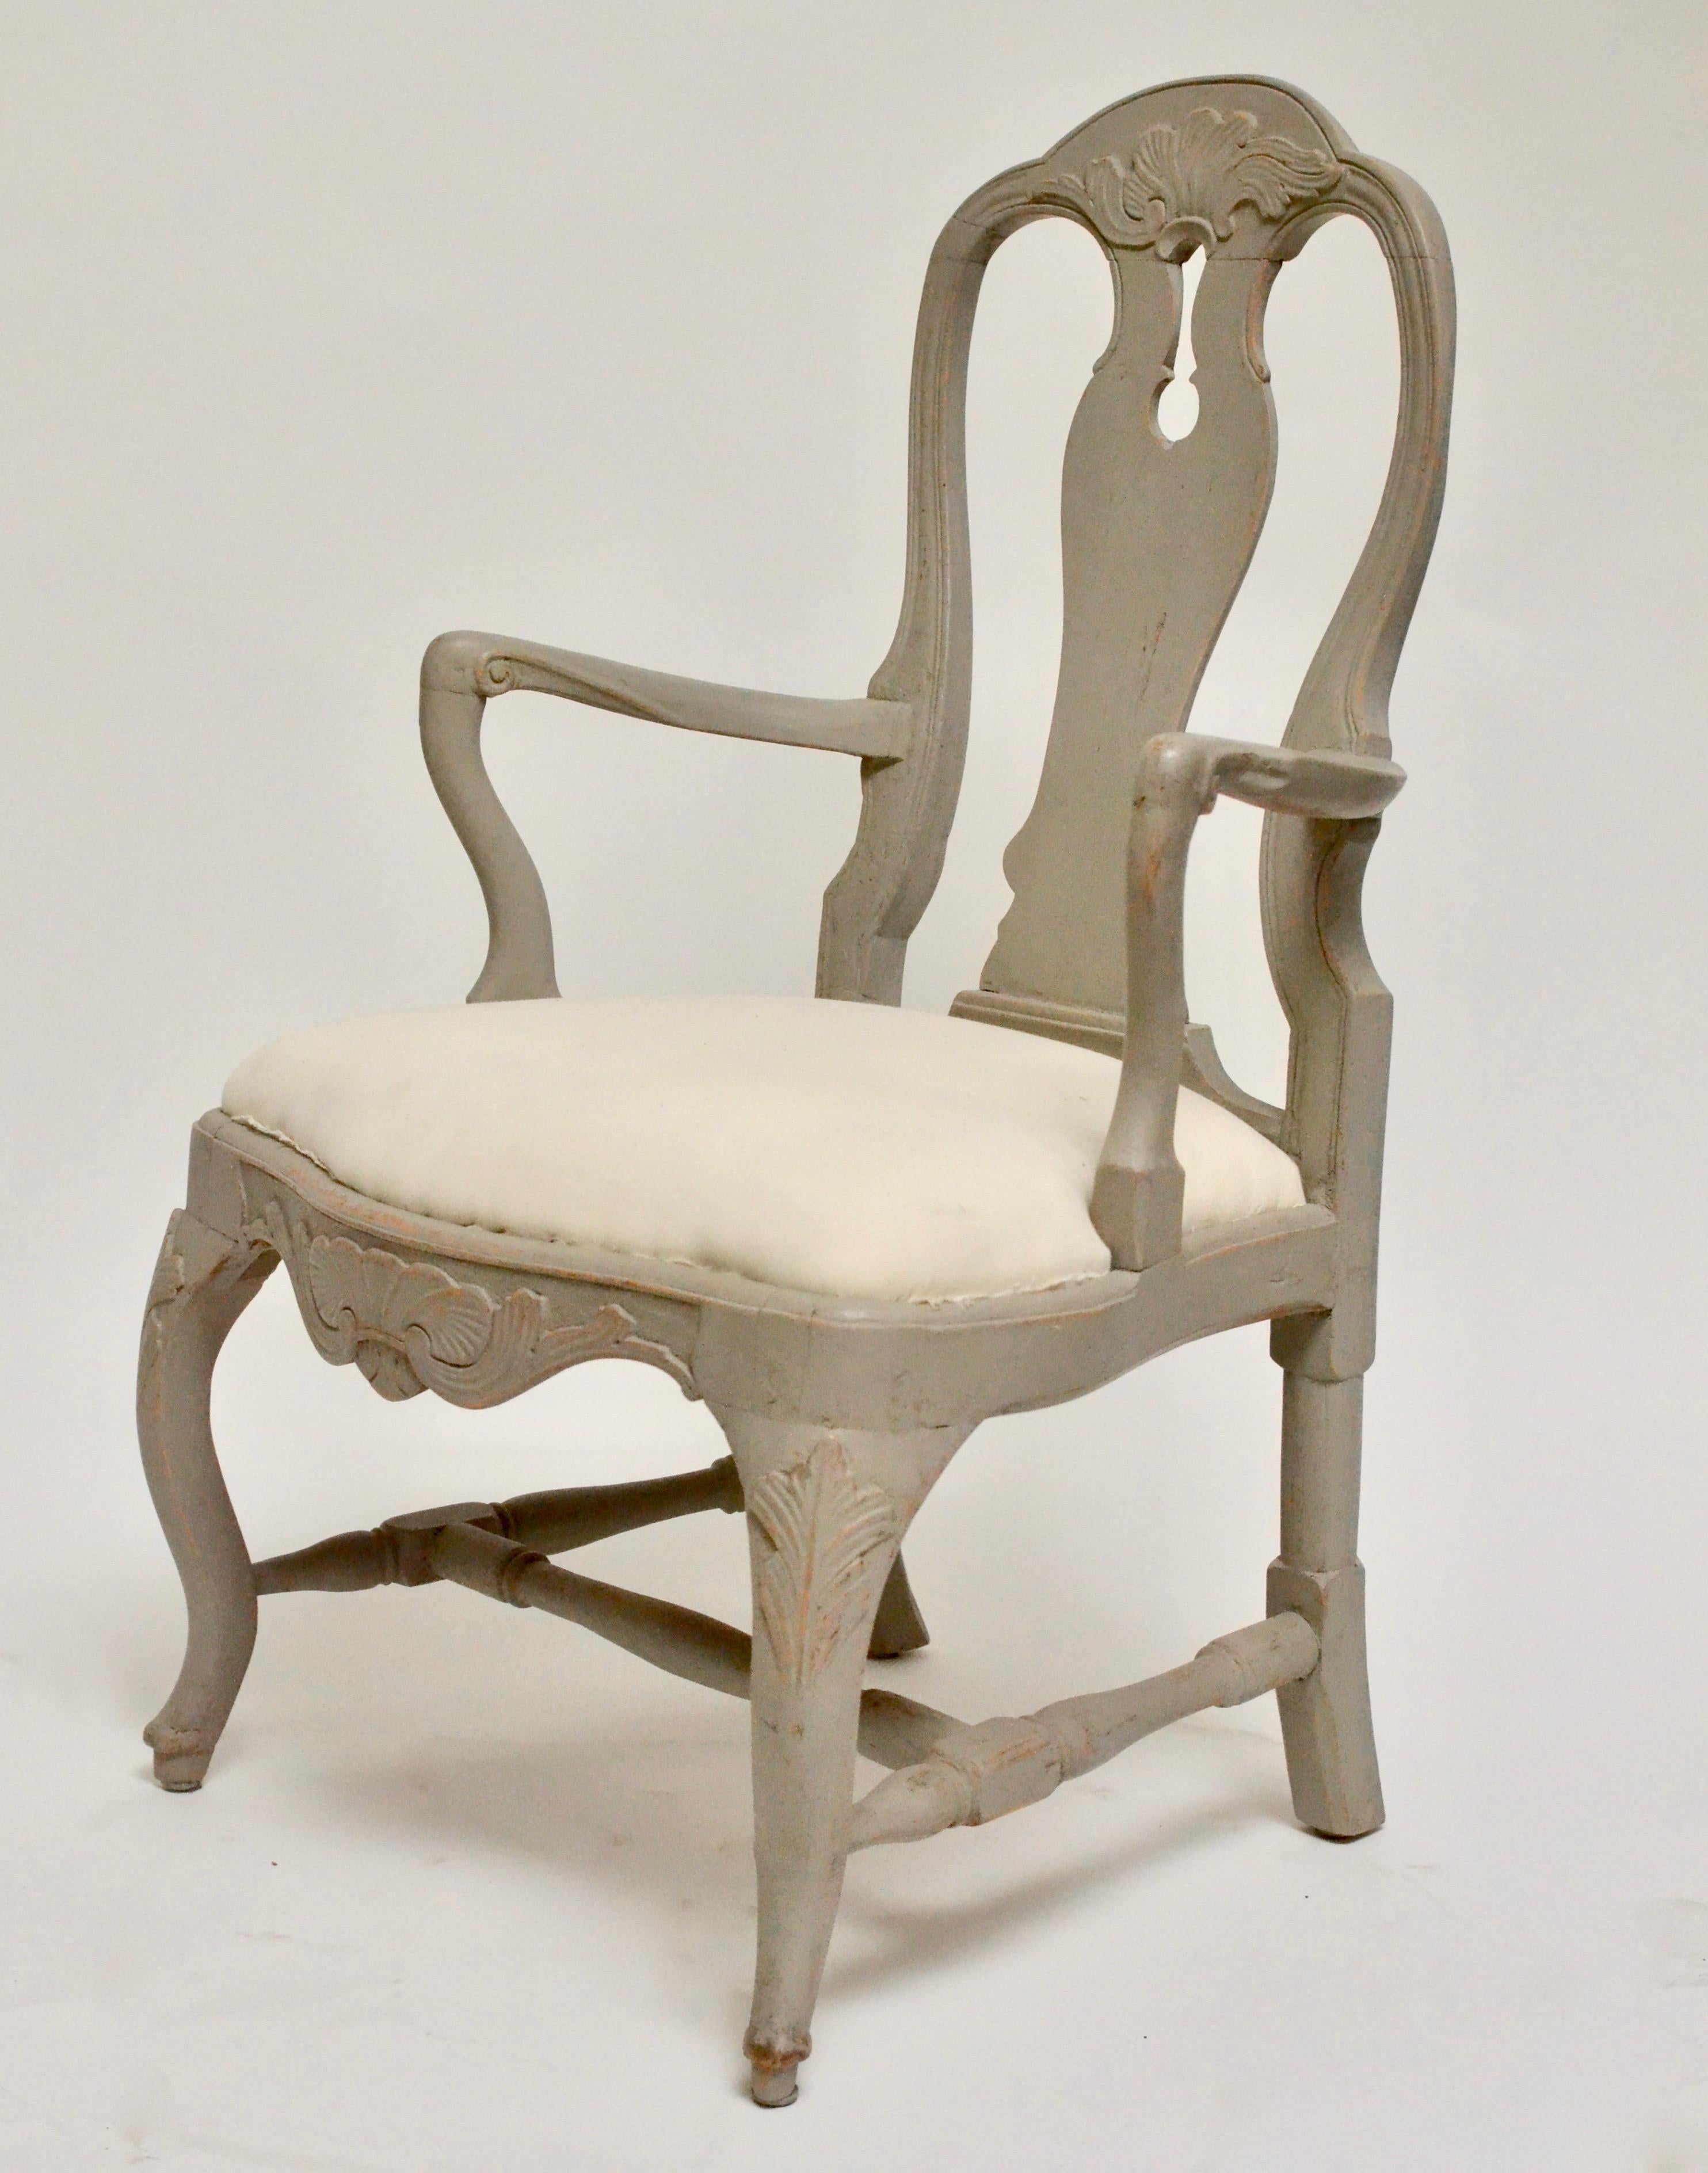 A nice pair of Swedish 18th century Rococo armchairs. Painted grey. Newly upholstered with plain weave, needs fabric.